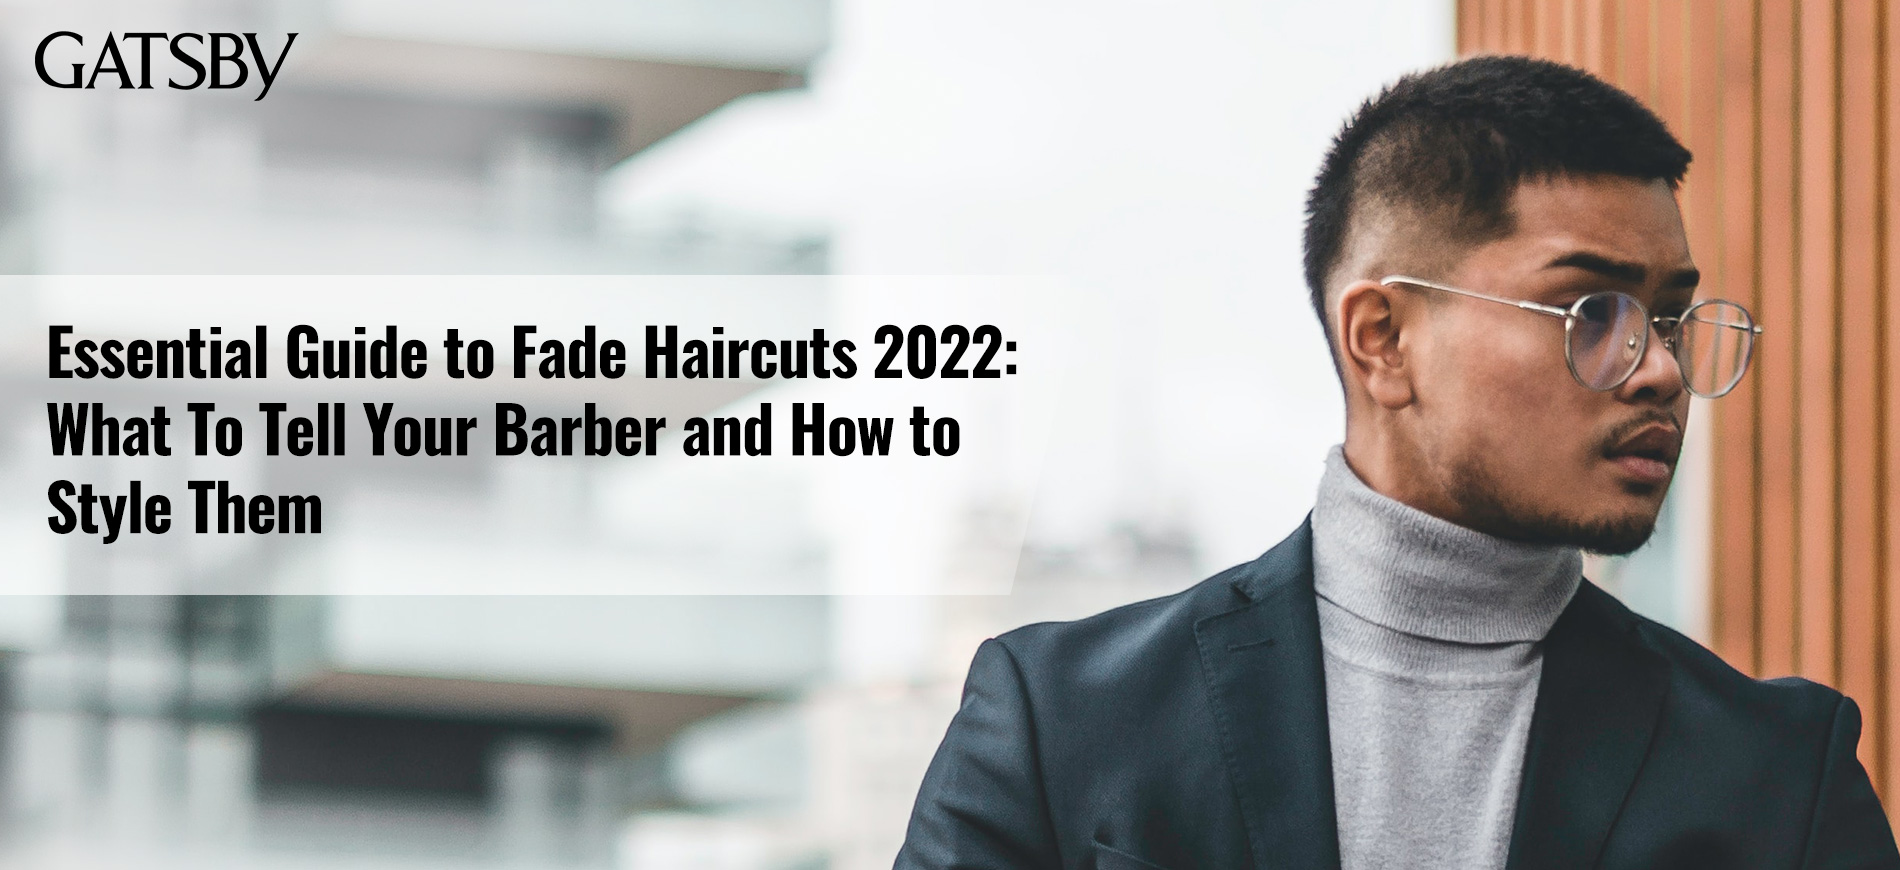 50 Popular Fade Haircuts For Men To Get in 2023